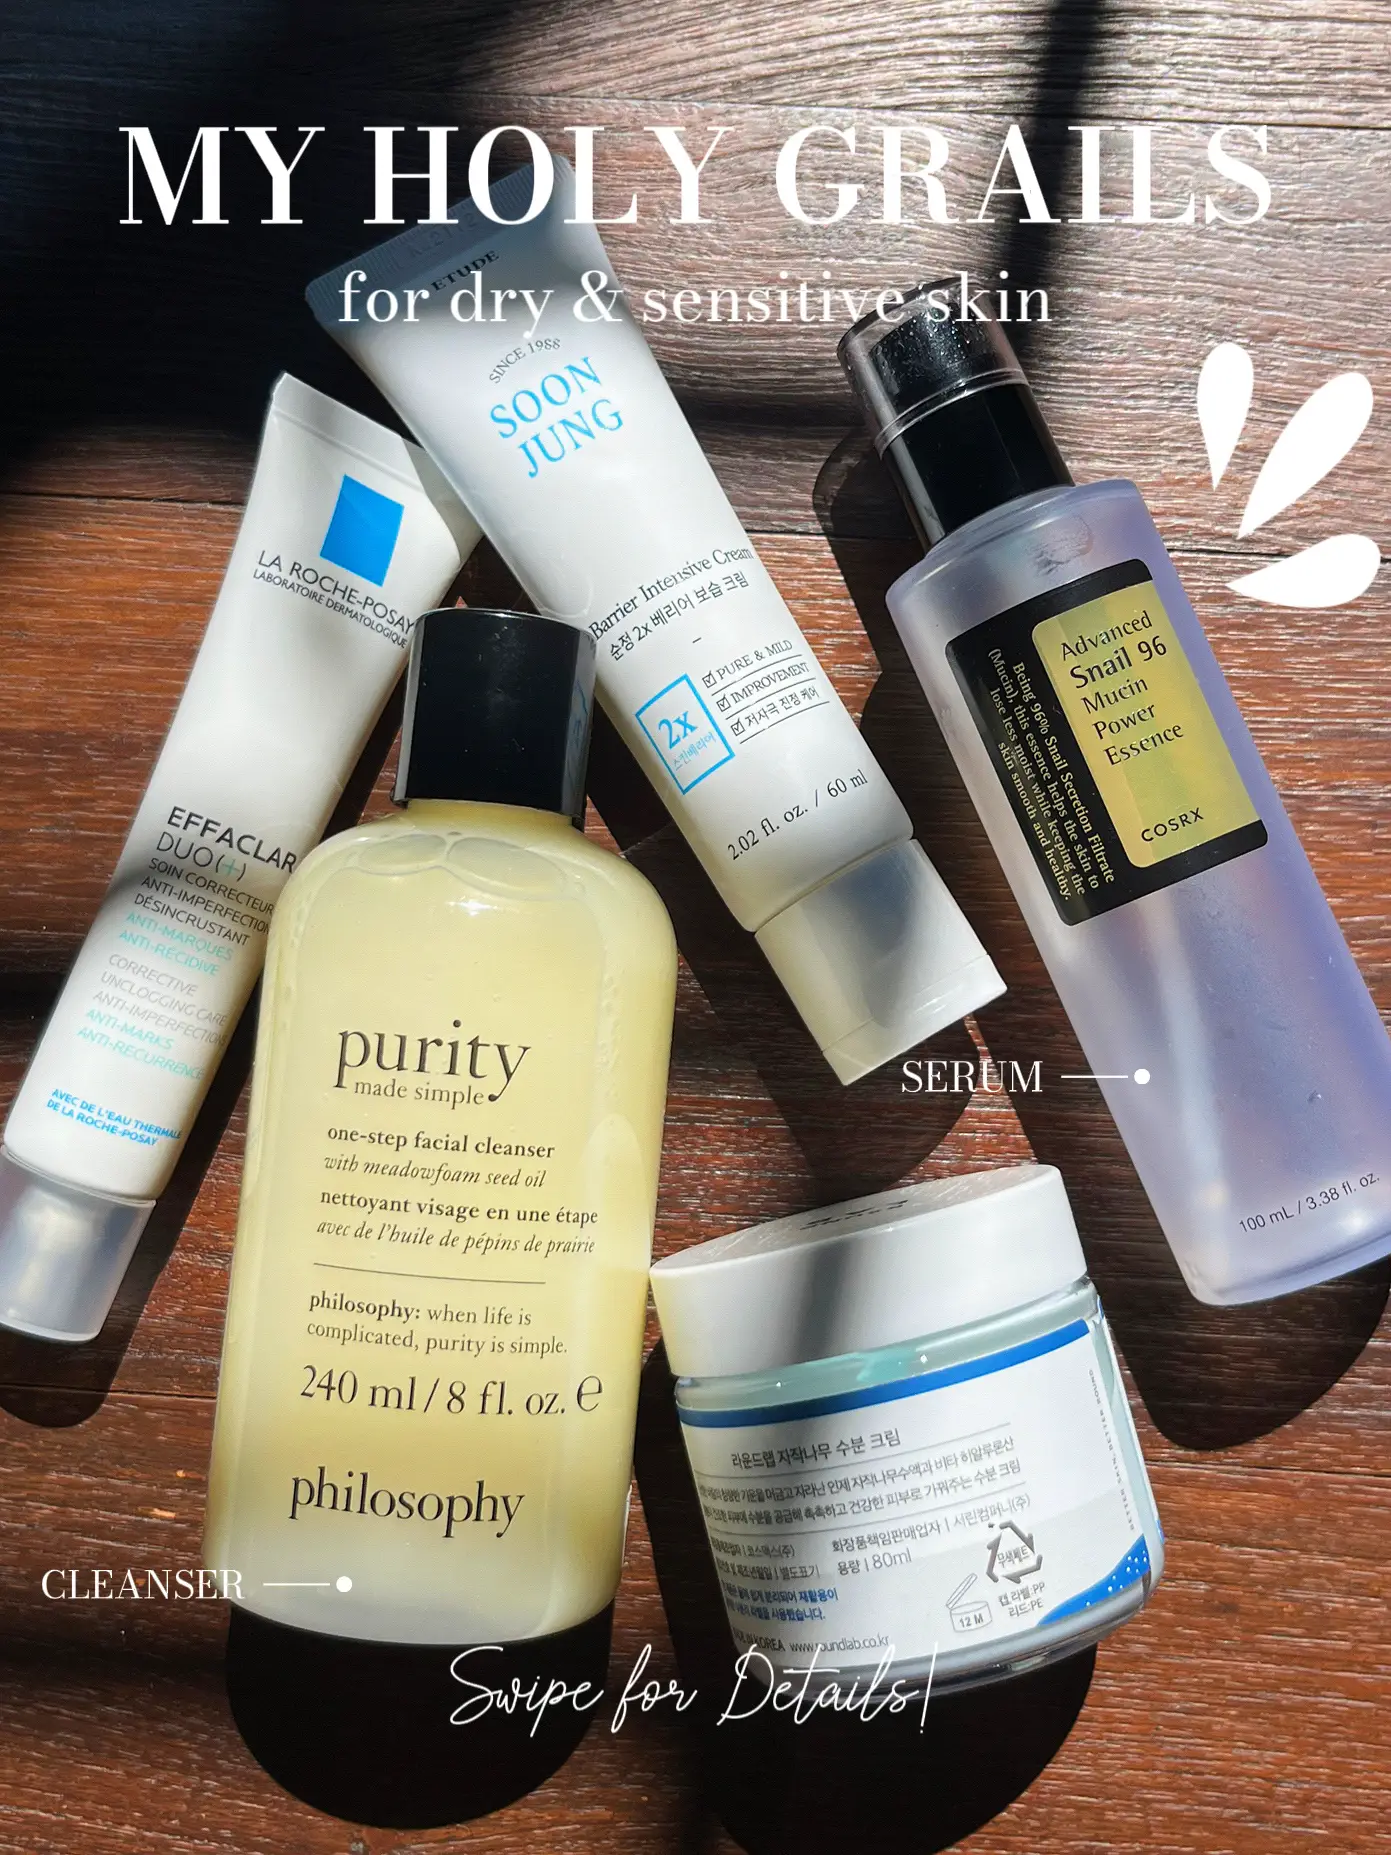 SKINCARE MUST-HAVES FOR DRY & SENSITIVE SKIN💥💦's images(0)